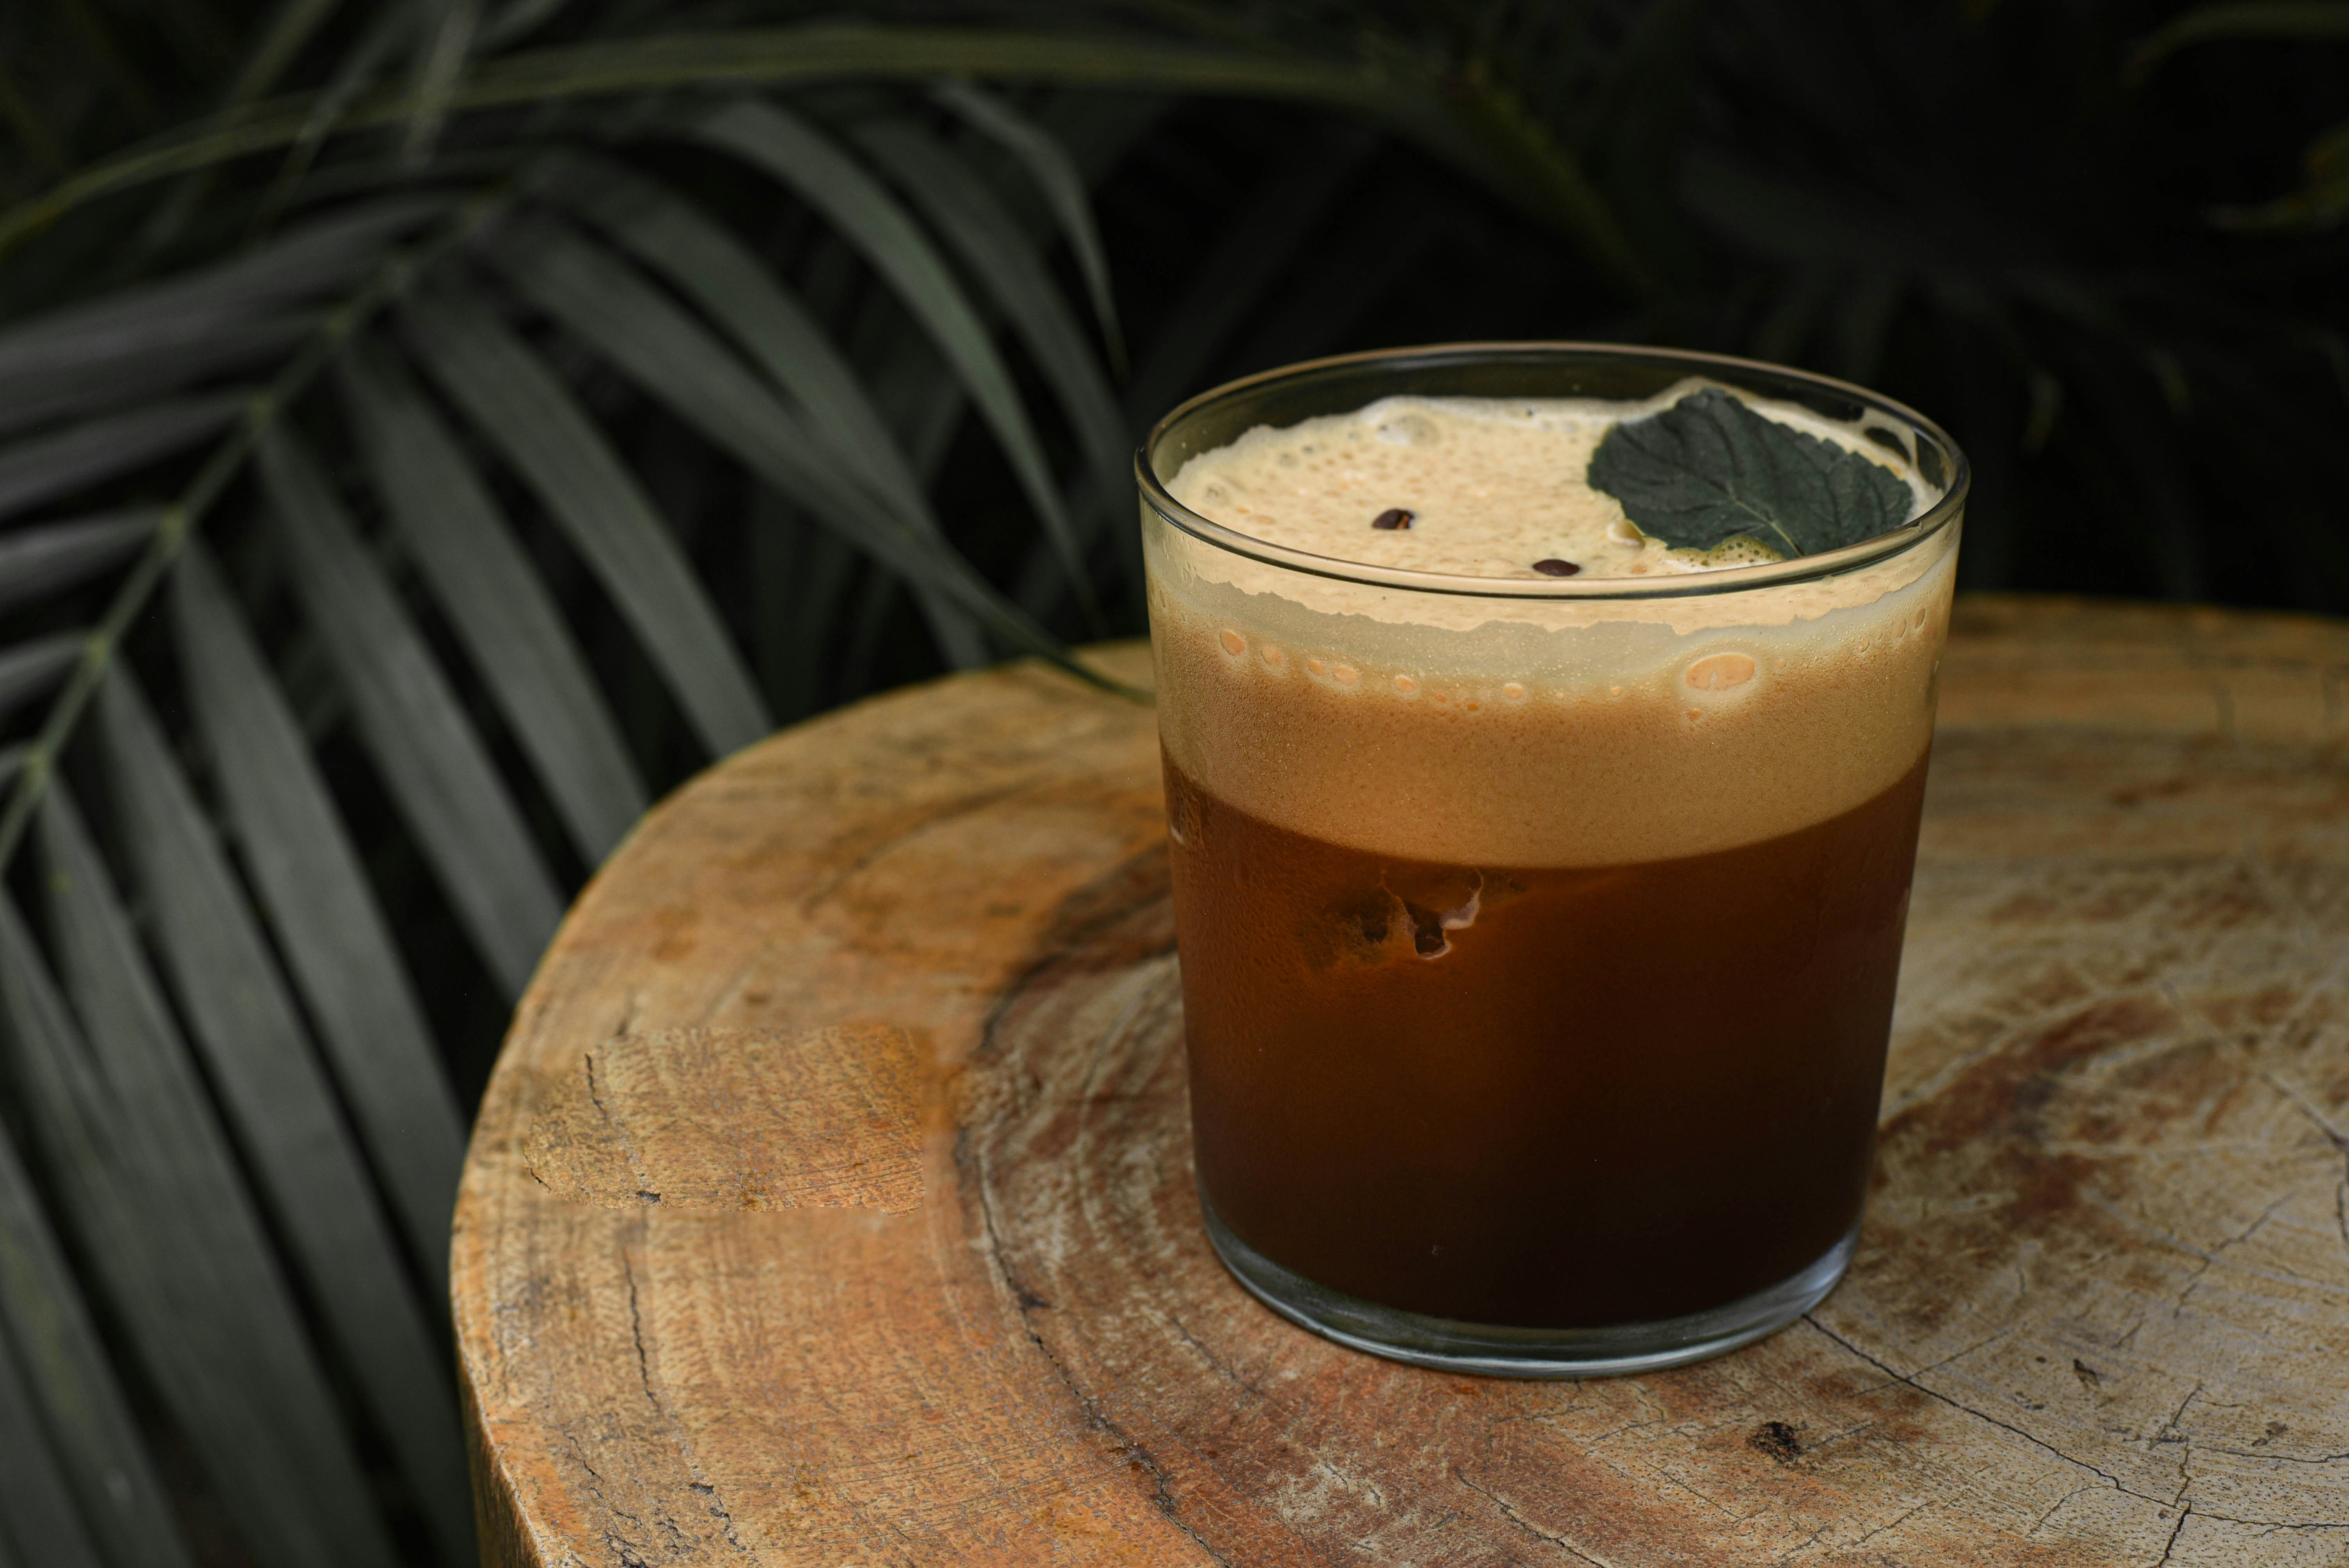 Exploring Unusual Combinations: A Tequila And Coffee Marriage